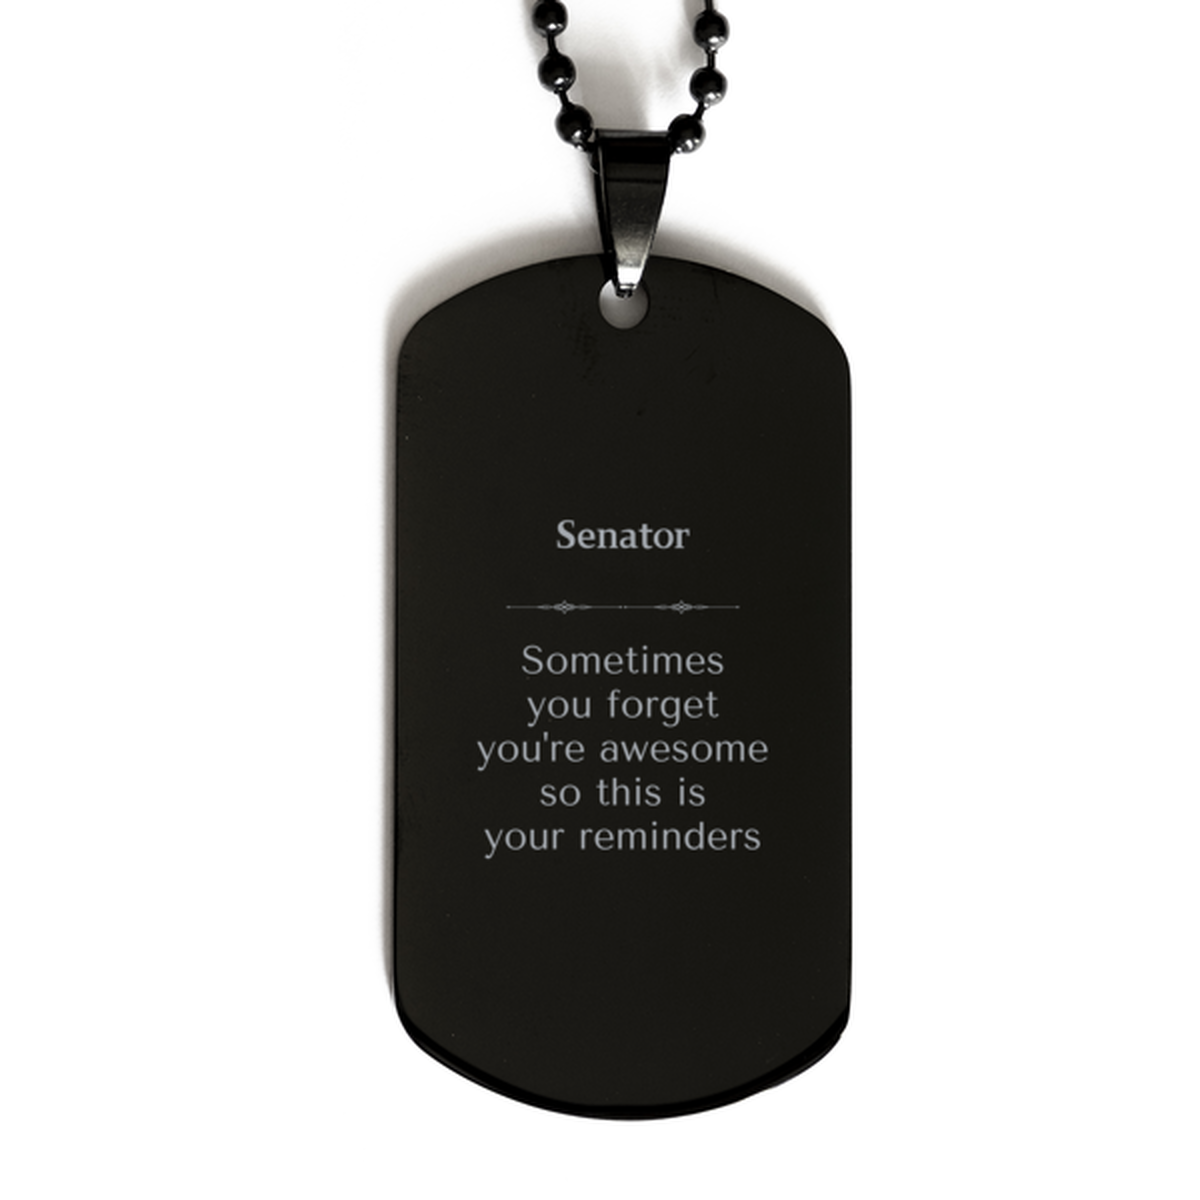 Sentimental Senator Black Dog Tag, Senator Sometimes you forget you're awesome so this is your reminders, Graduation Christmas Birthday Gifts for Senator, Men, Women, Coworkers